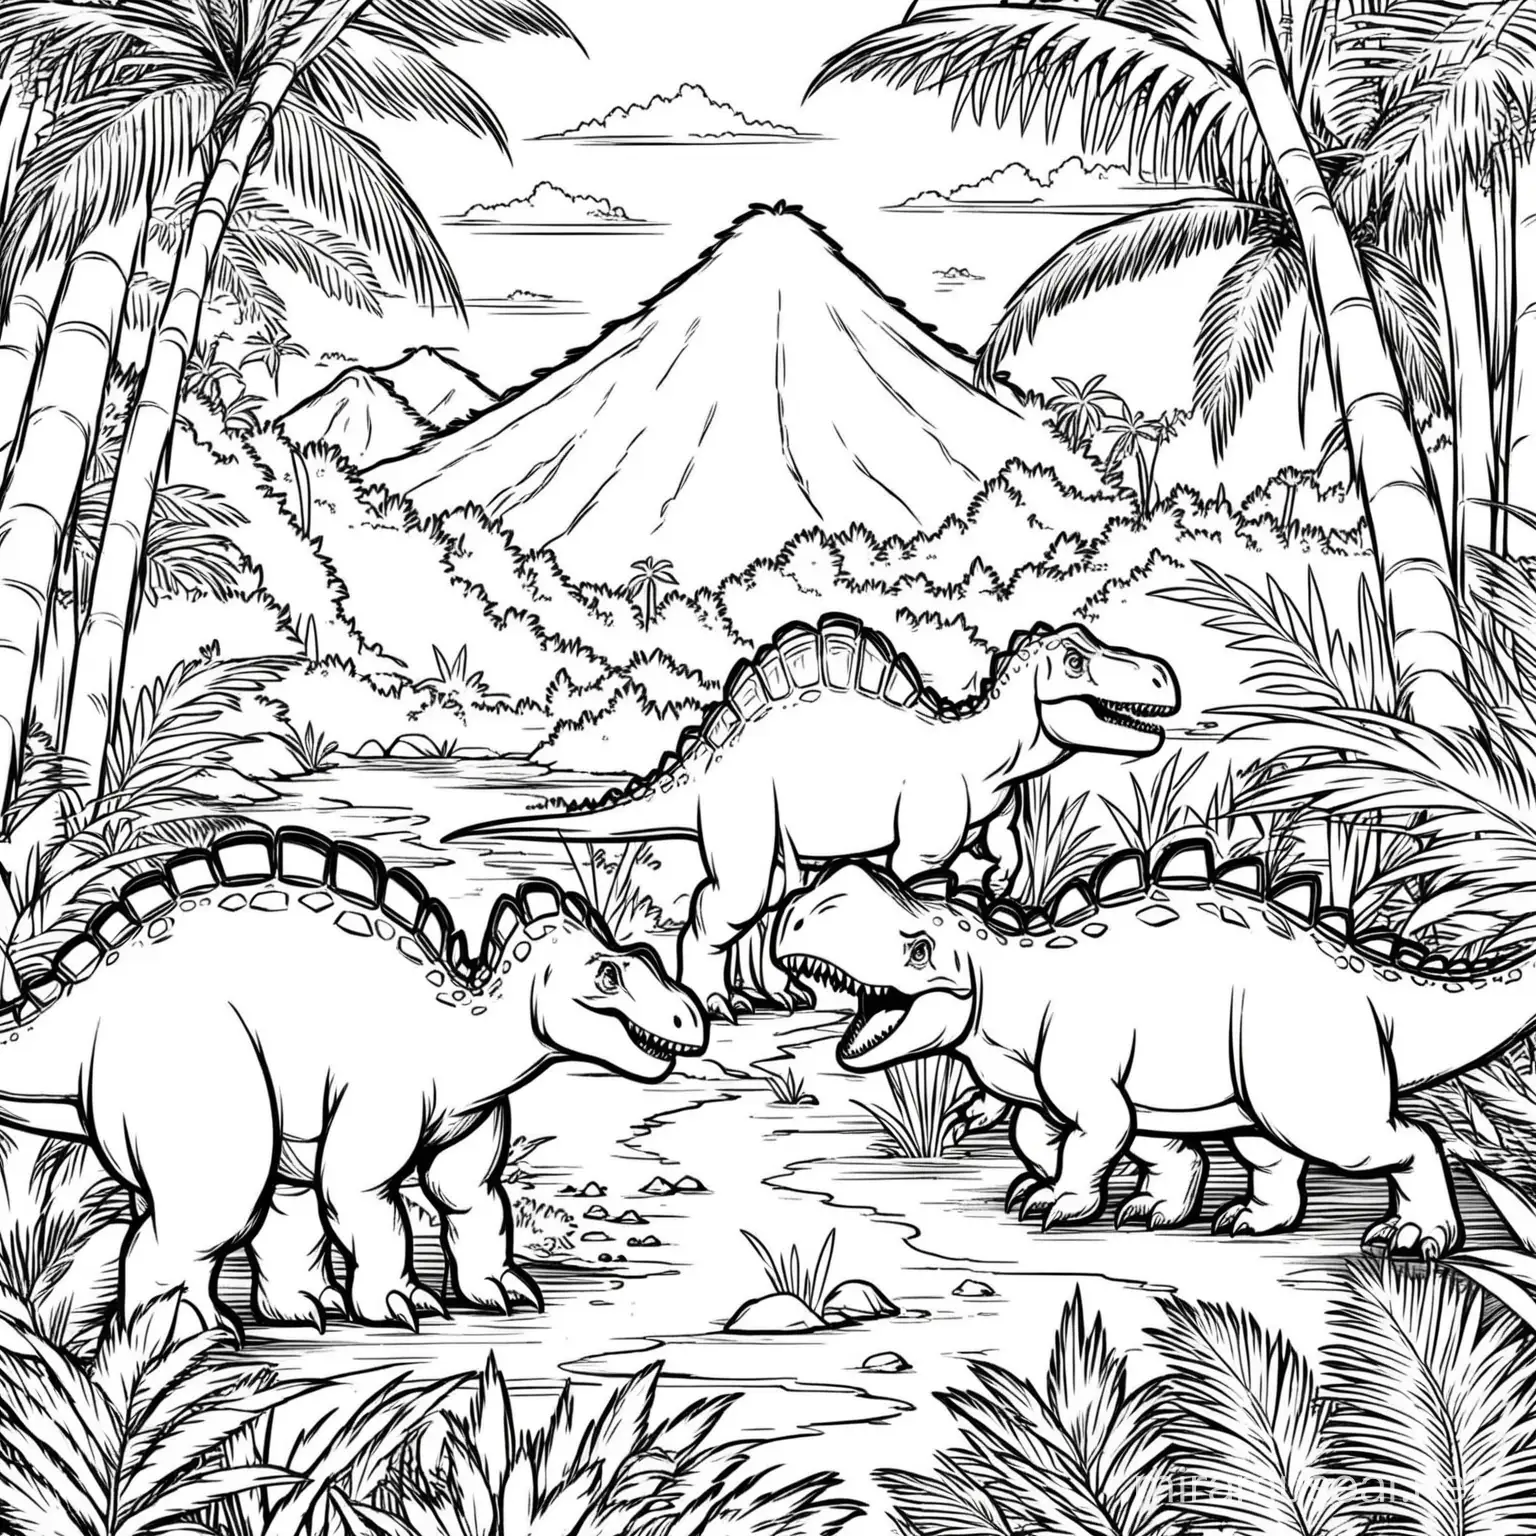 Colorful Jungle Scene with Dinosaurs for Childrens Coloring Activity